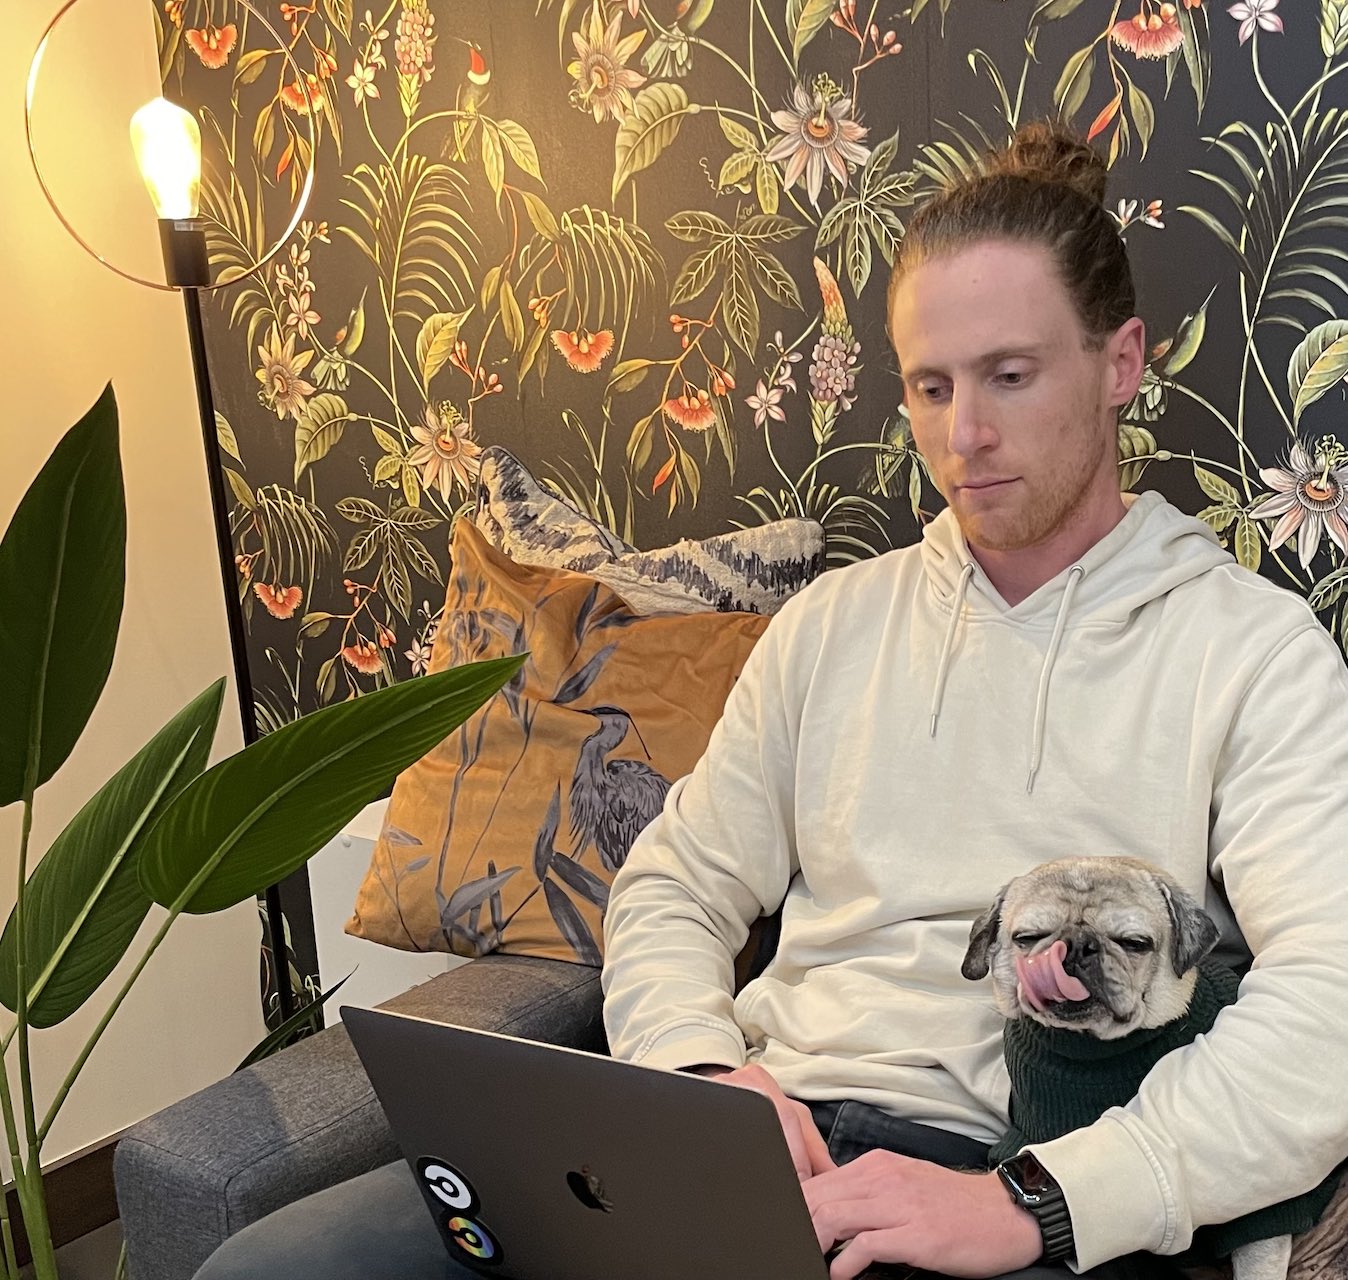 A team member sitting on a couch working on a laptop with their dog in between their arms.